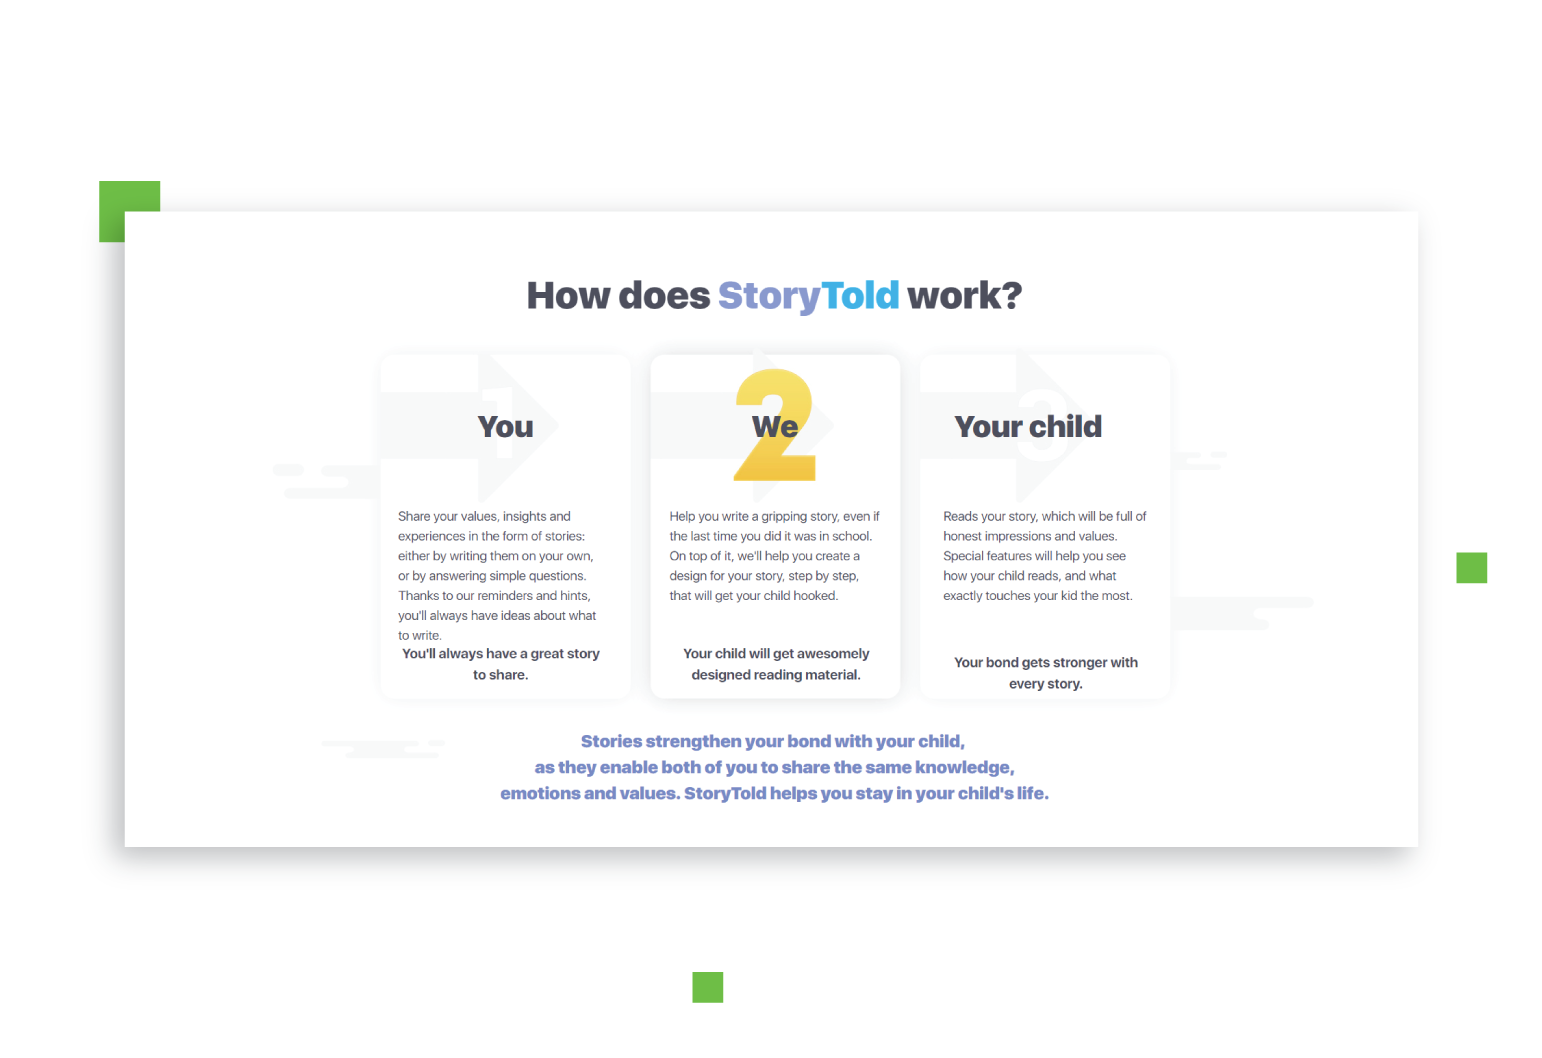 StoryTold’s CEO Dmitry Kompanets on Helping Parents Build Meaningful Relationships with Children in the Age of YouTube 3